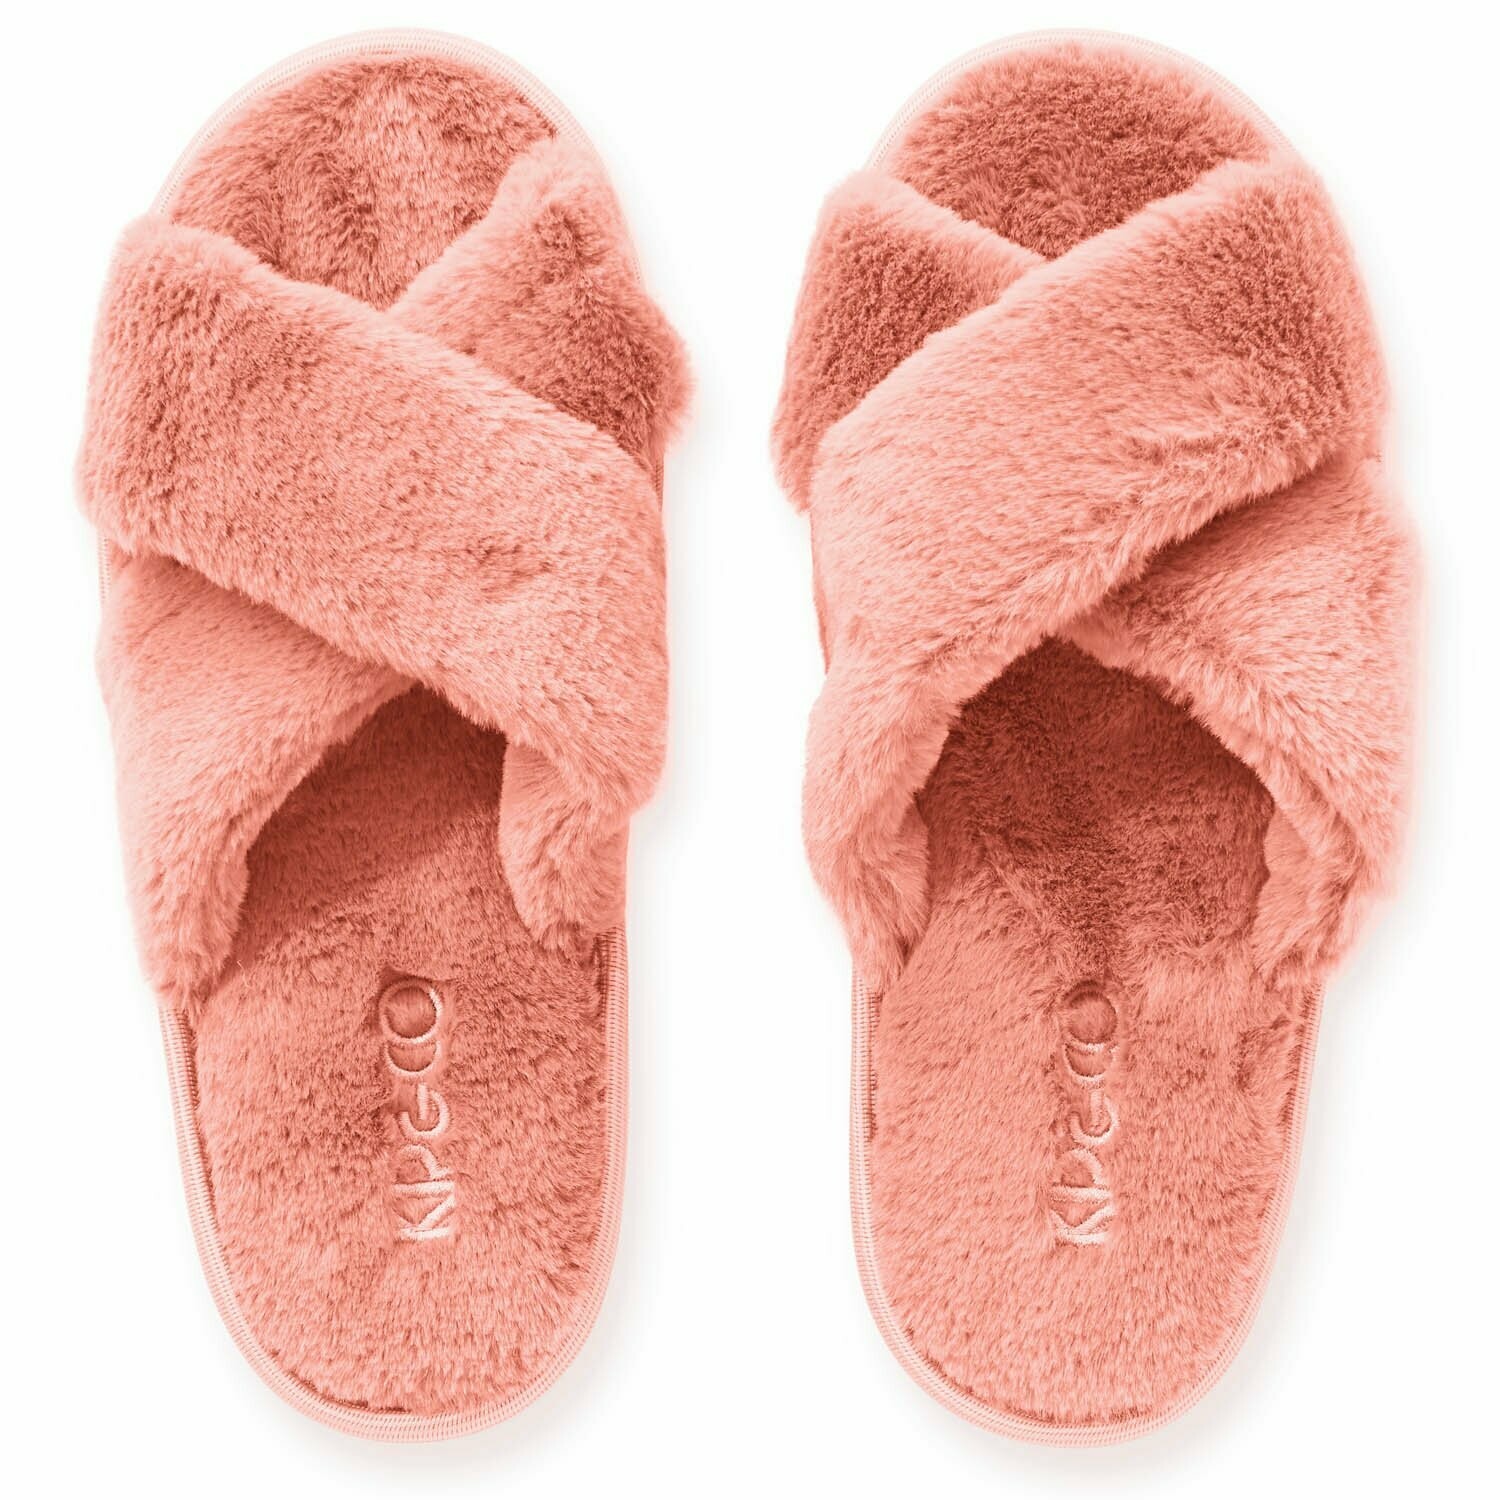 Adult Slippers - Blush Pink